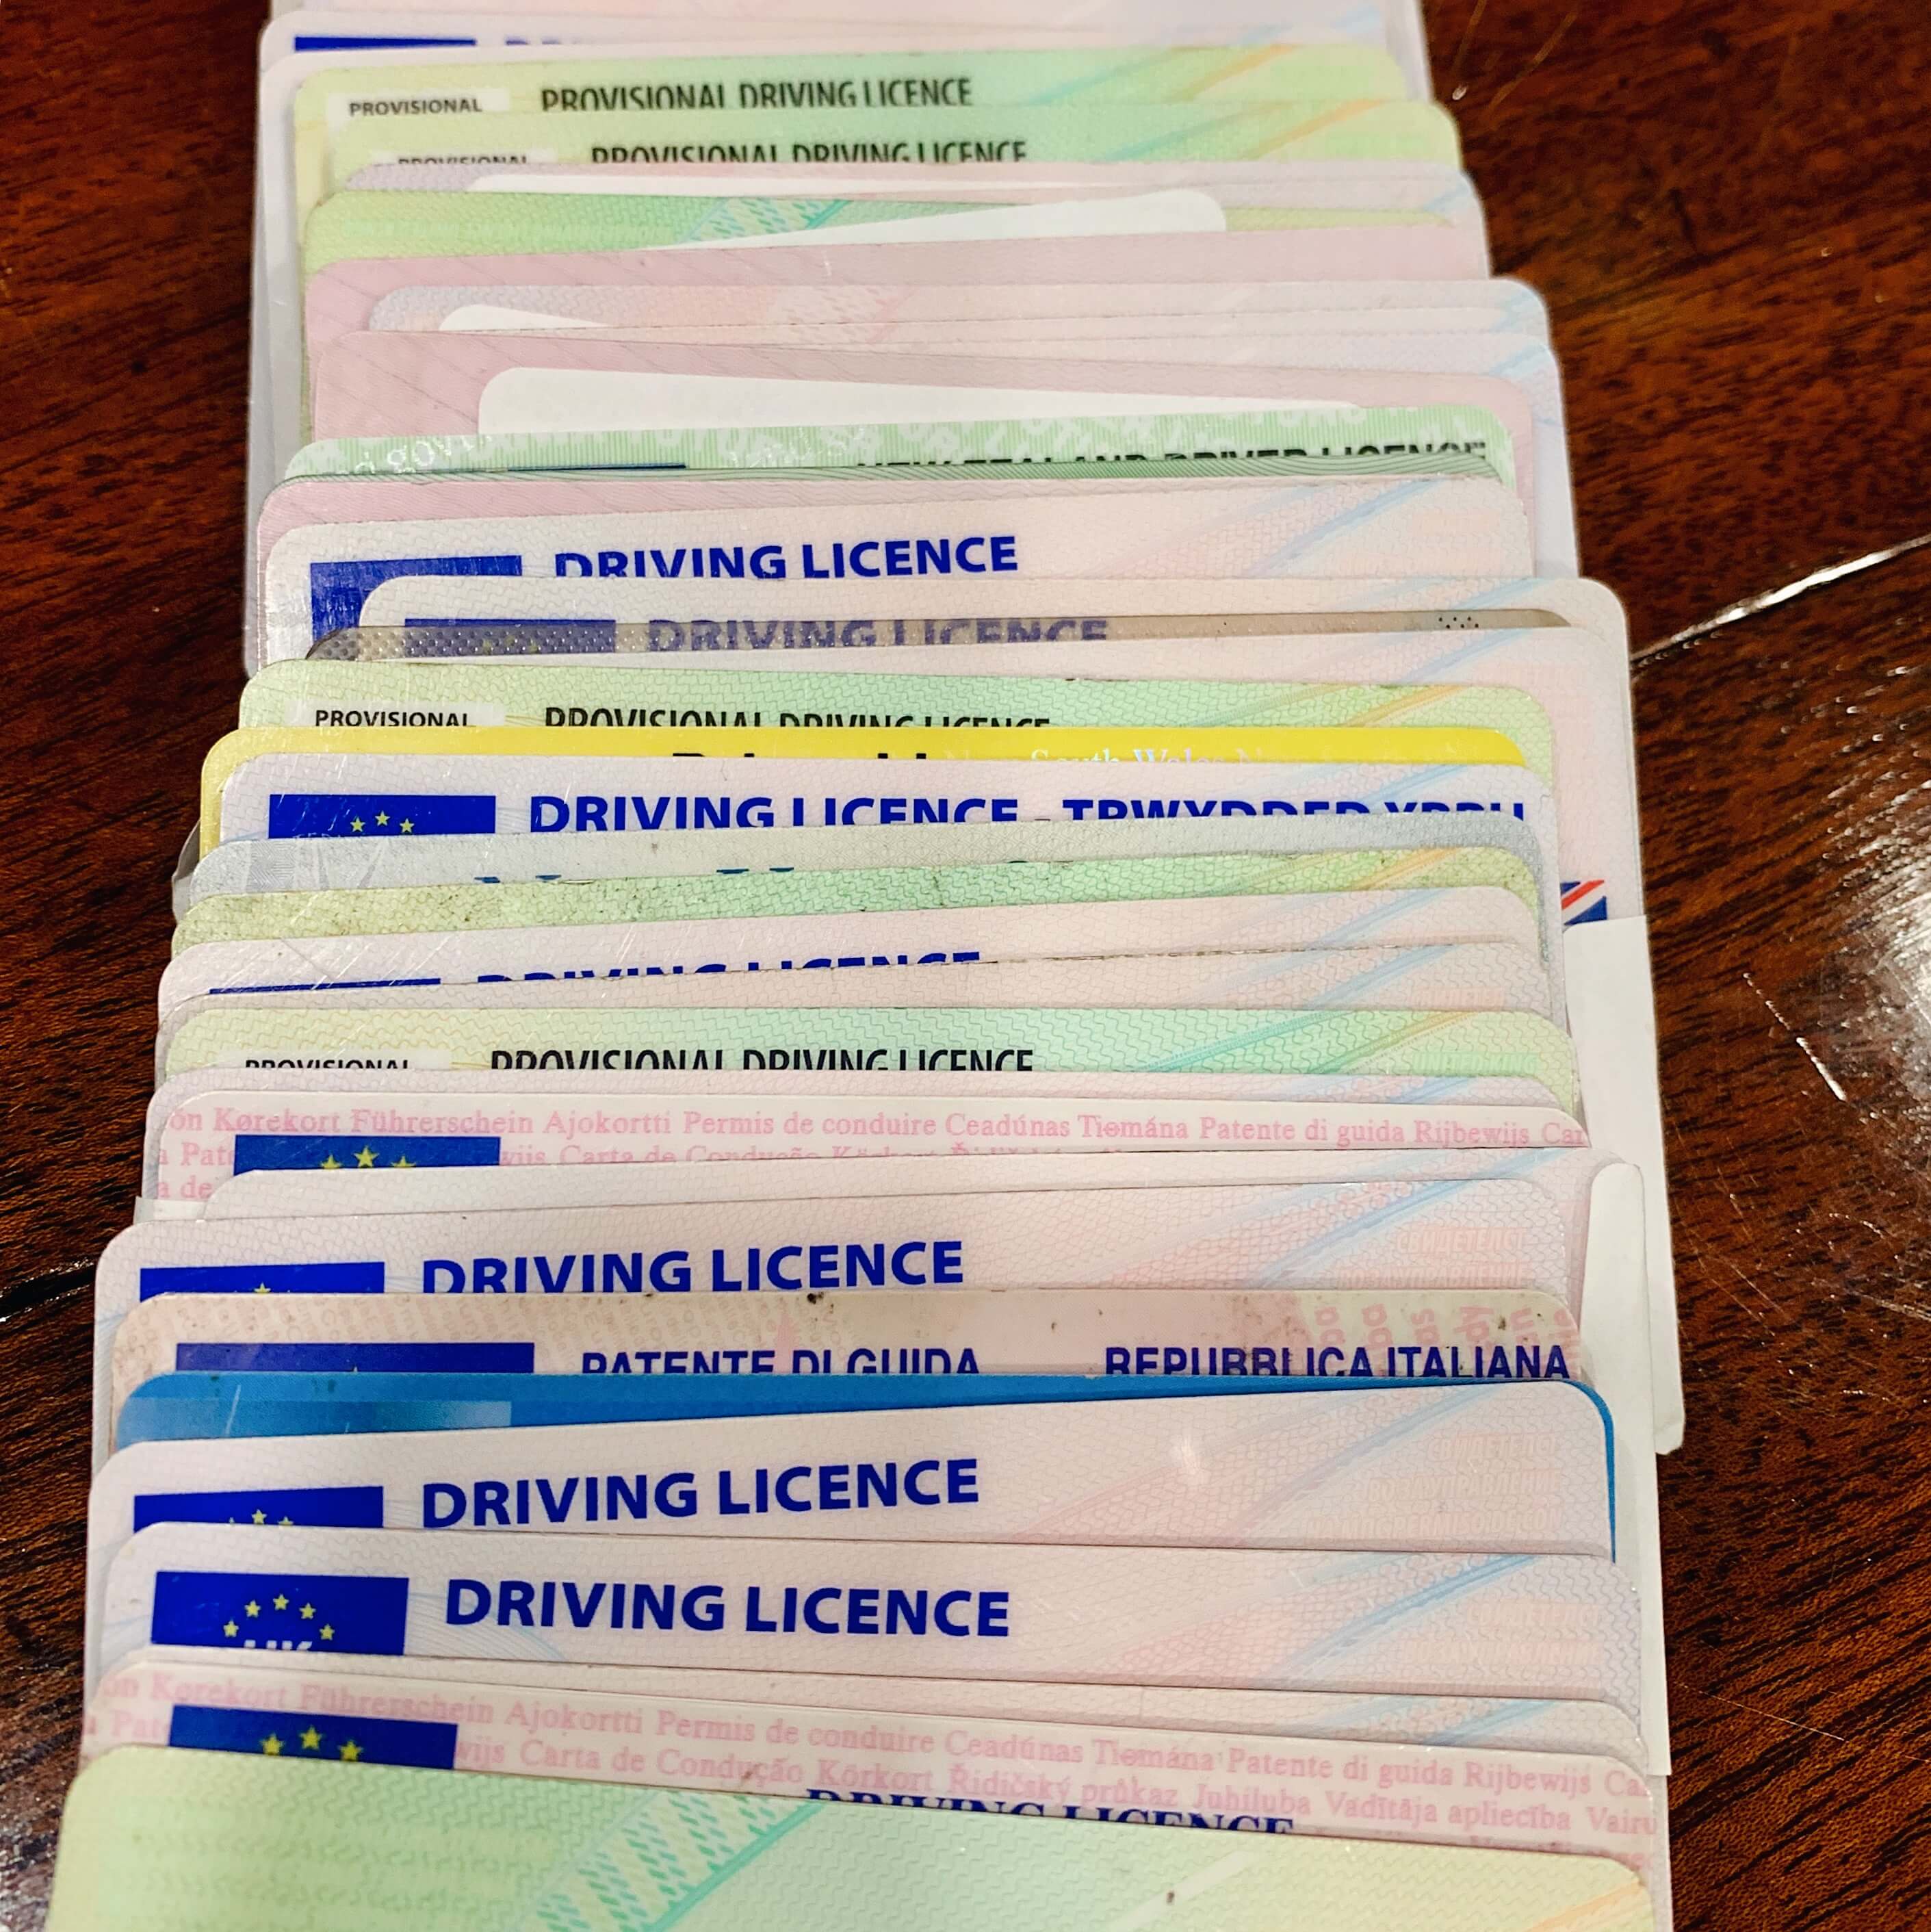 notlost-lost-property-driving-cards-licences